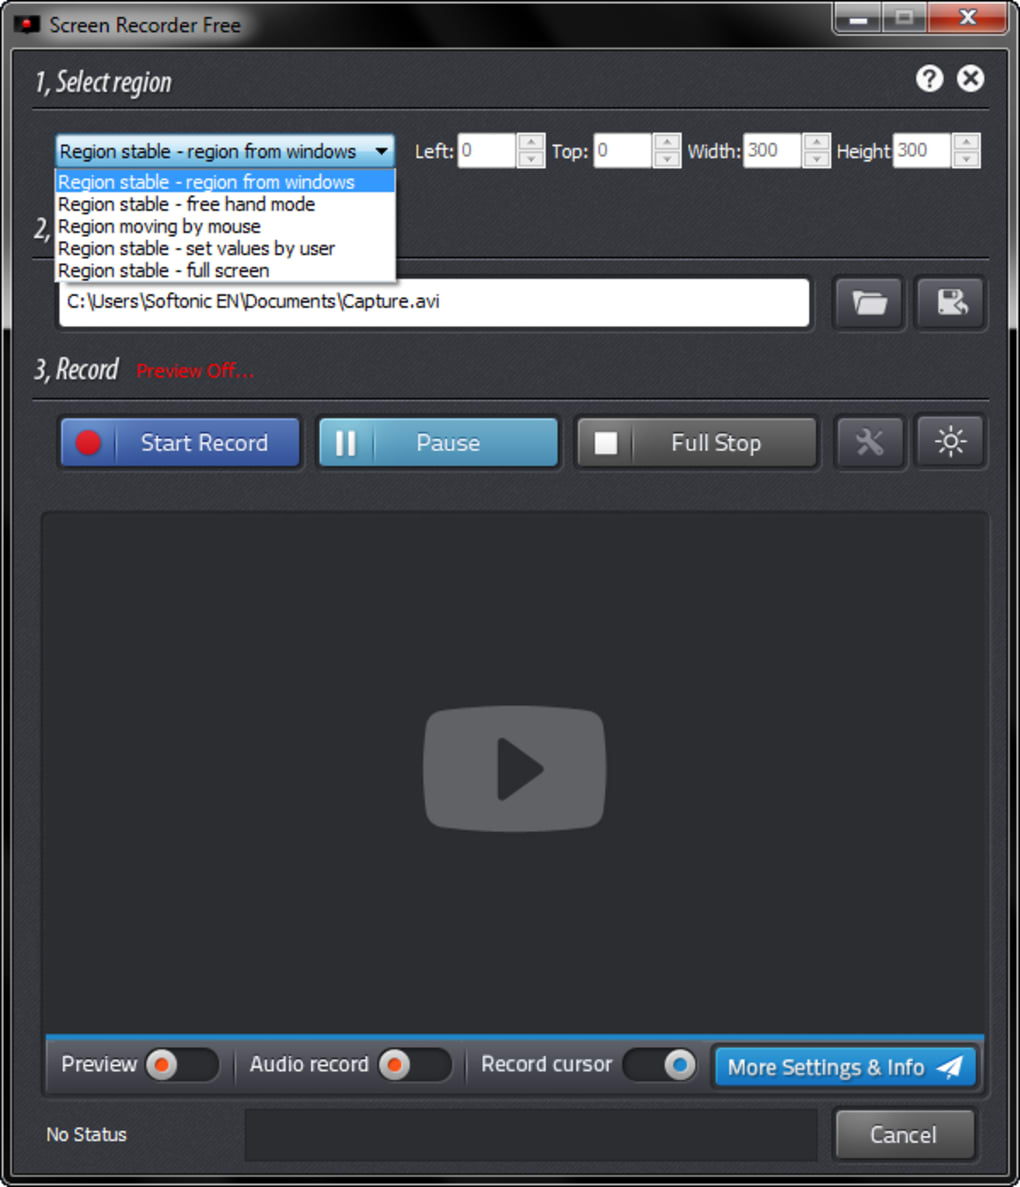 Video recorder free download for mac windows 10